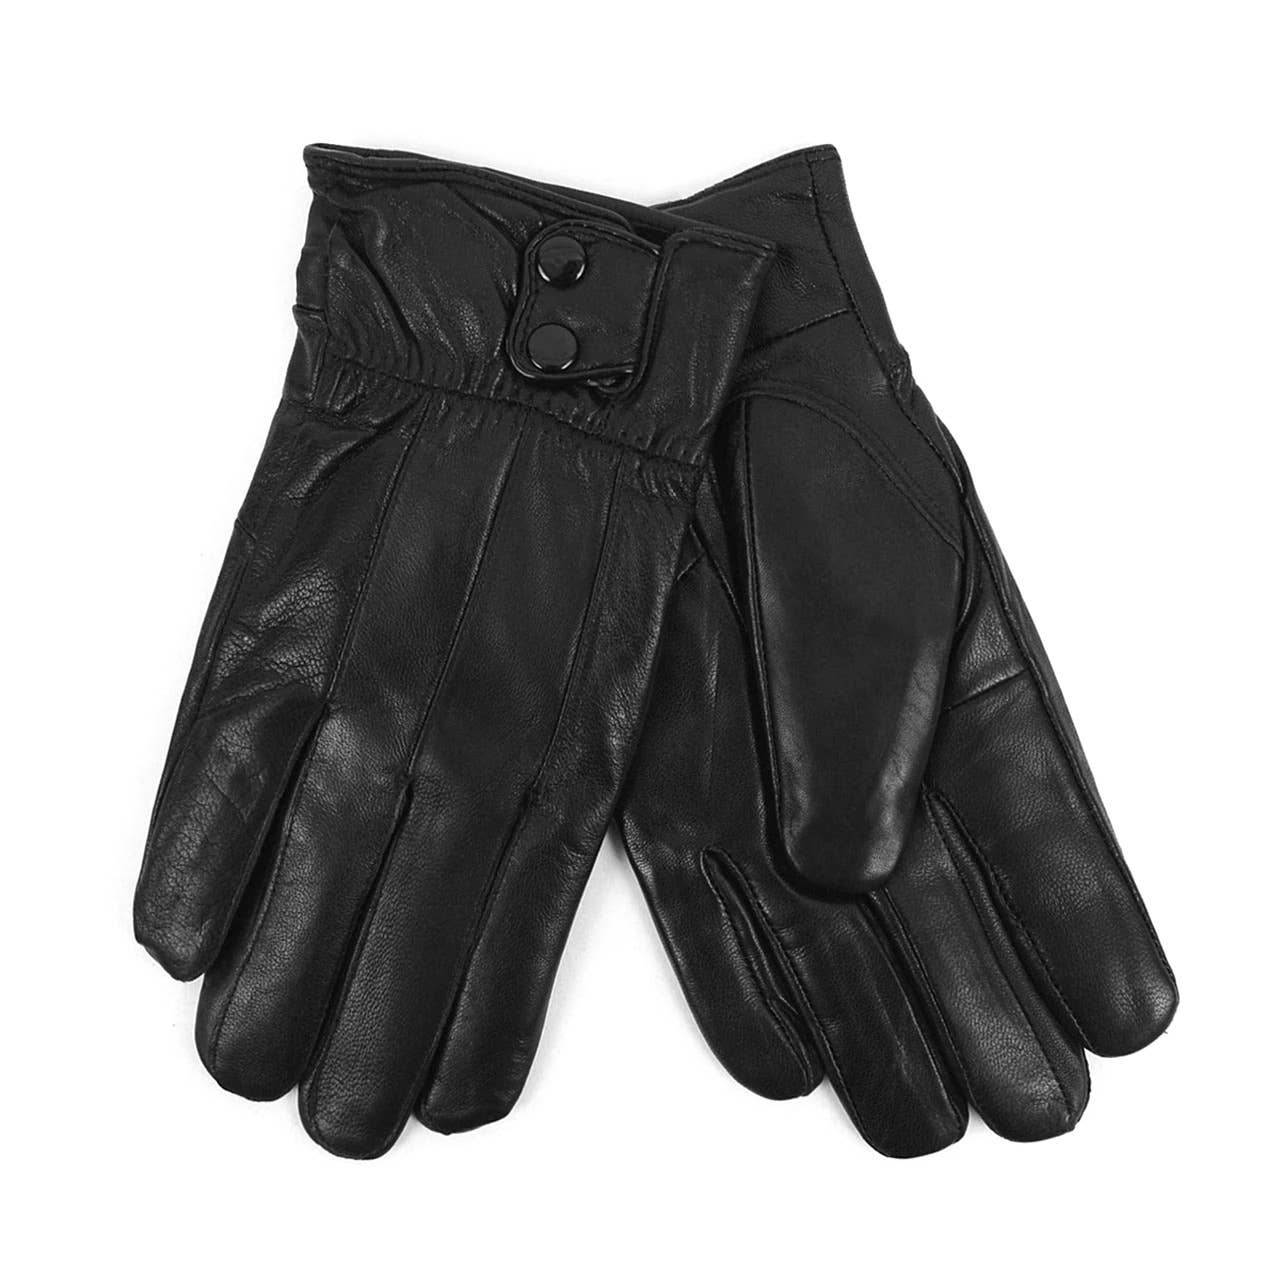 Men's Genuine Leather Winter Gloves with Soft Acrylic Lining: L/XL